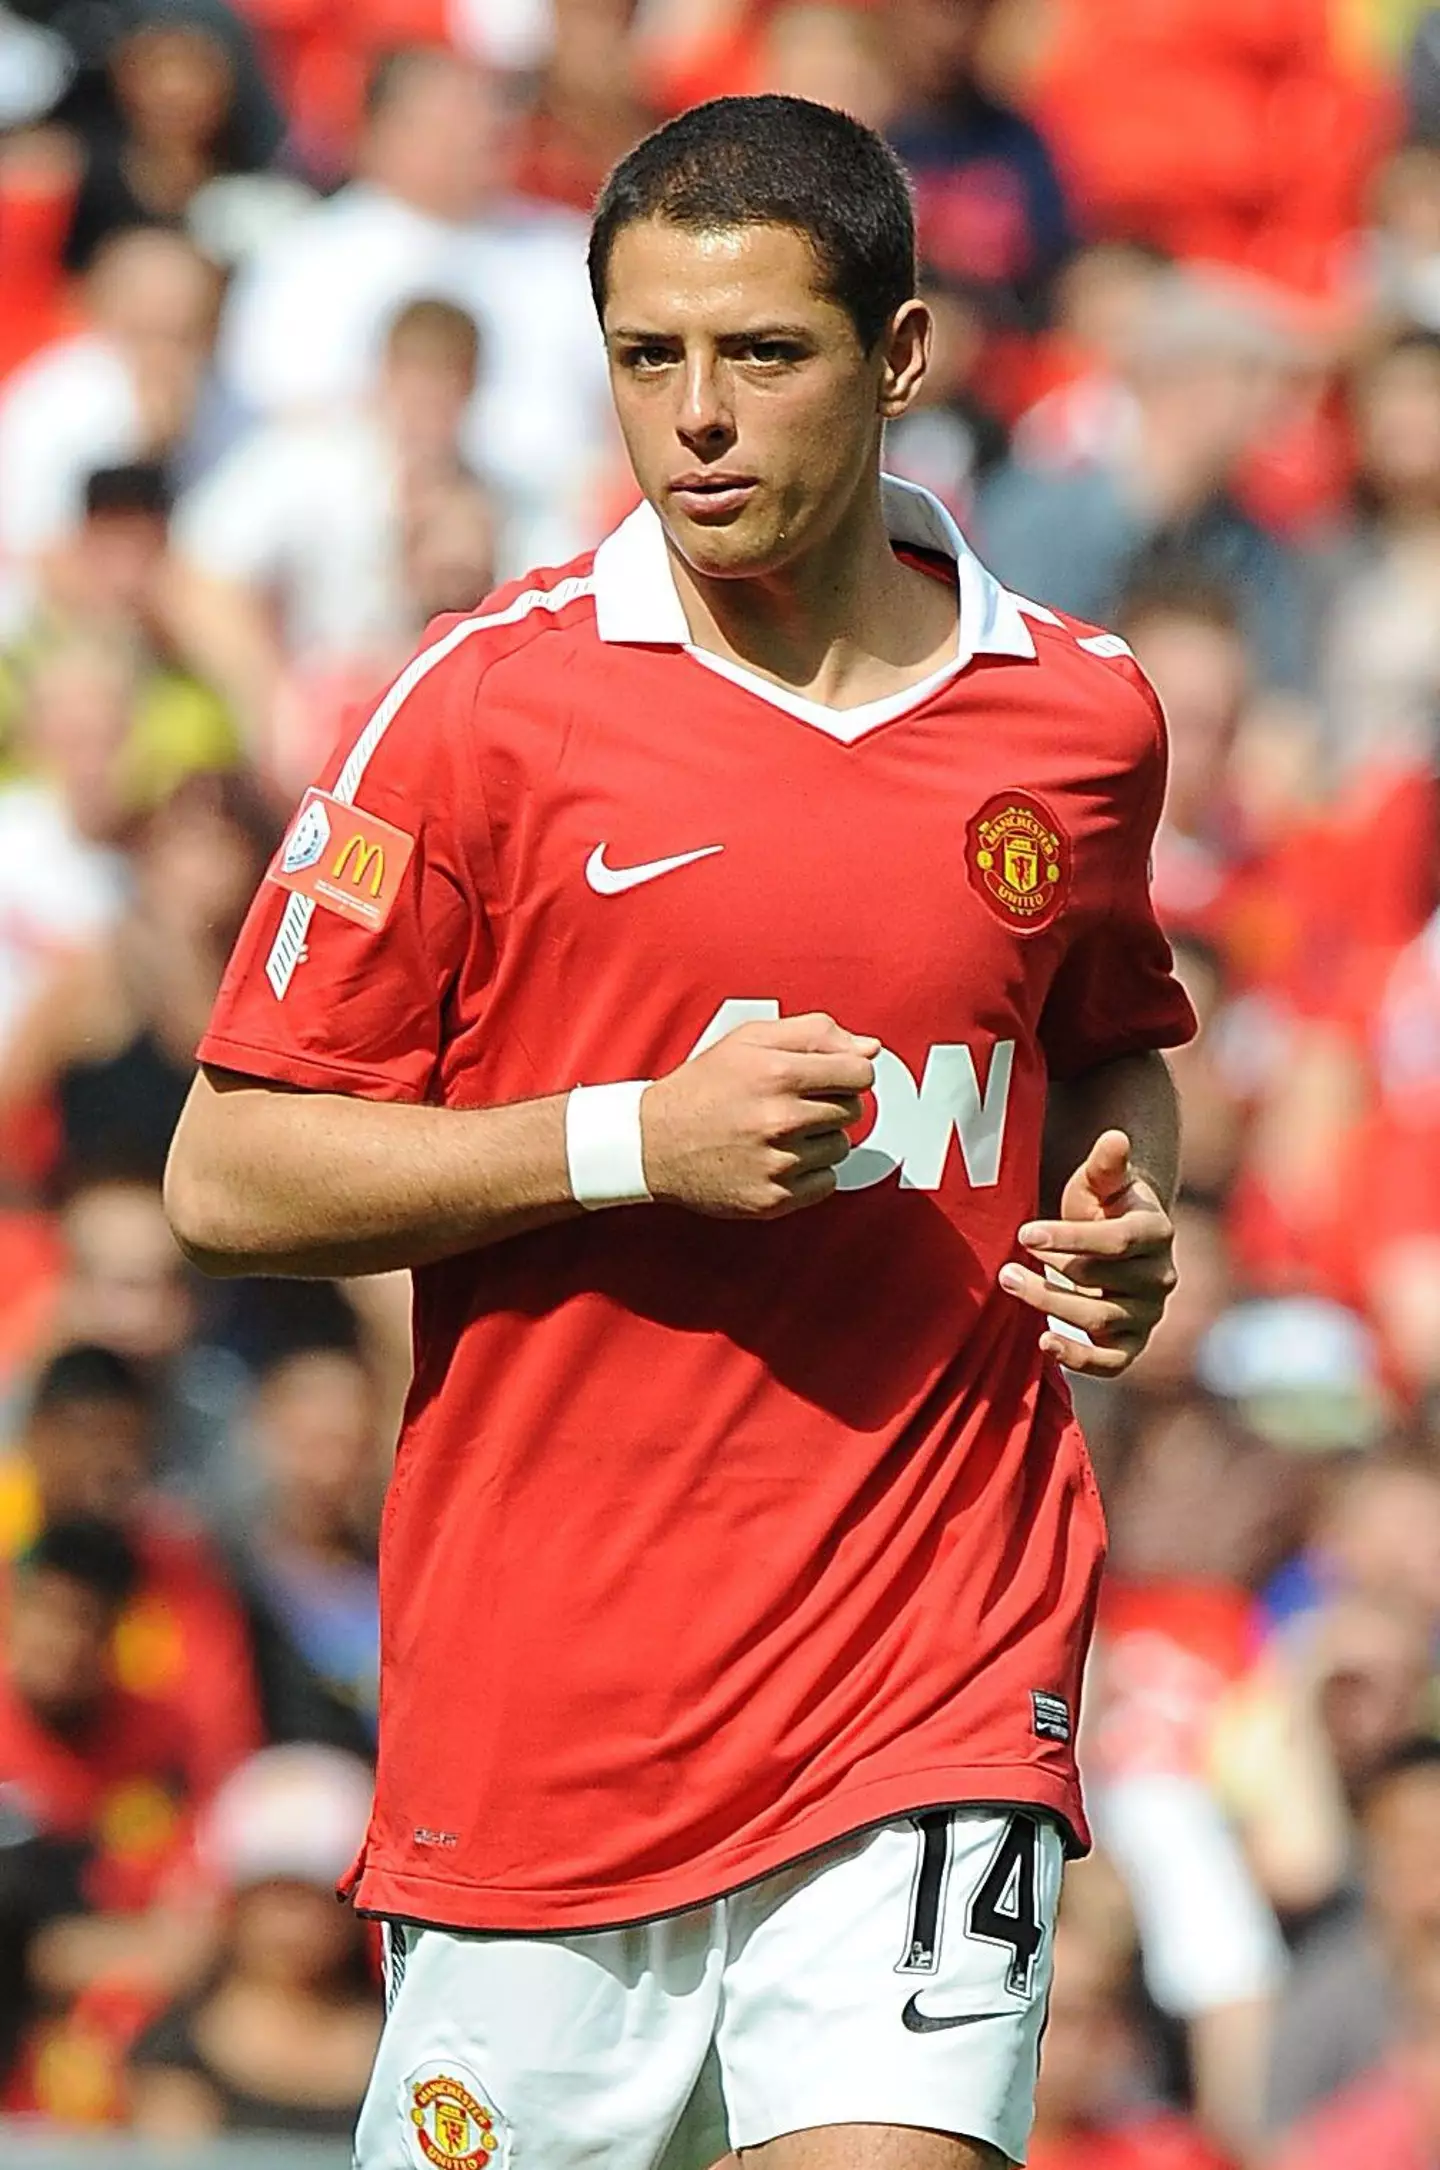 Javier Hernandez with Manchester United in 2010/11 |